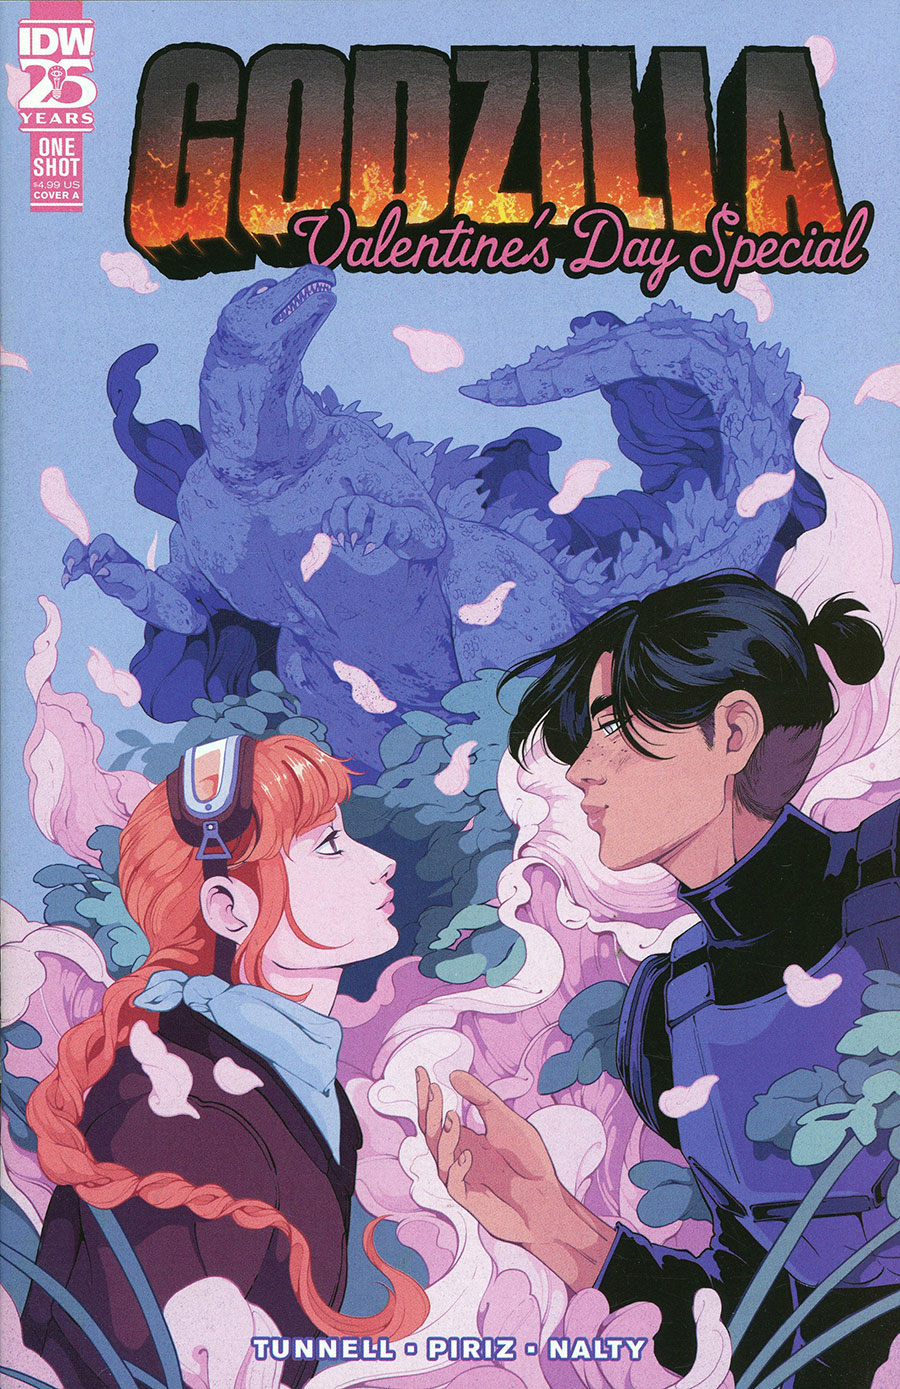 Godzilla Valentines Day Special #1 (One Shot) Cover A Regular Dani Pendergast Cover